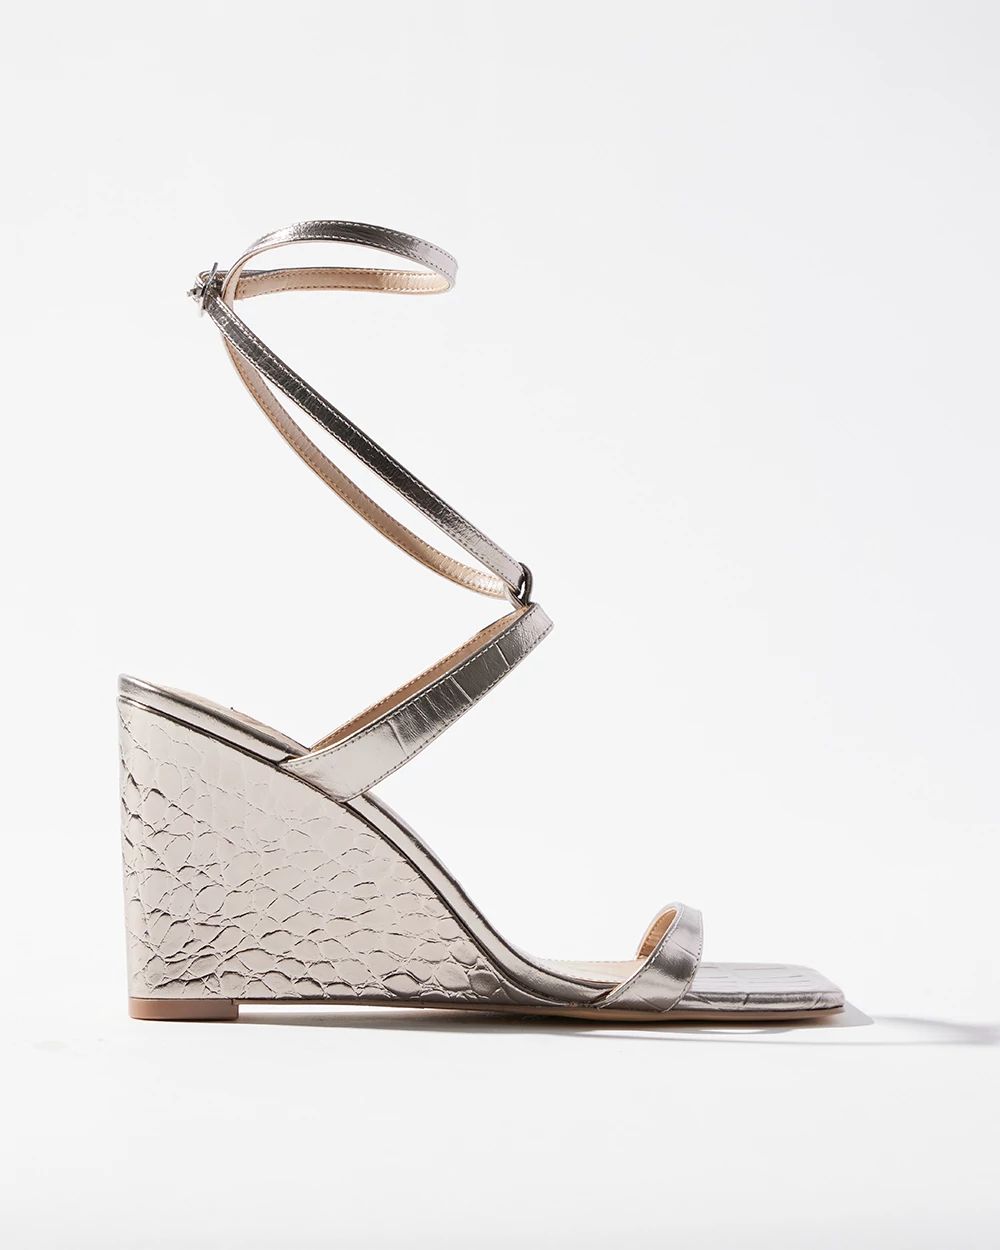 Metallic Croco-Embossed Wedge Sandal click to view larger image.